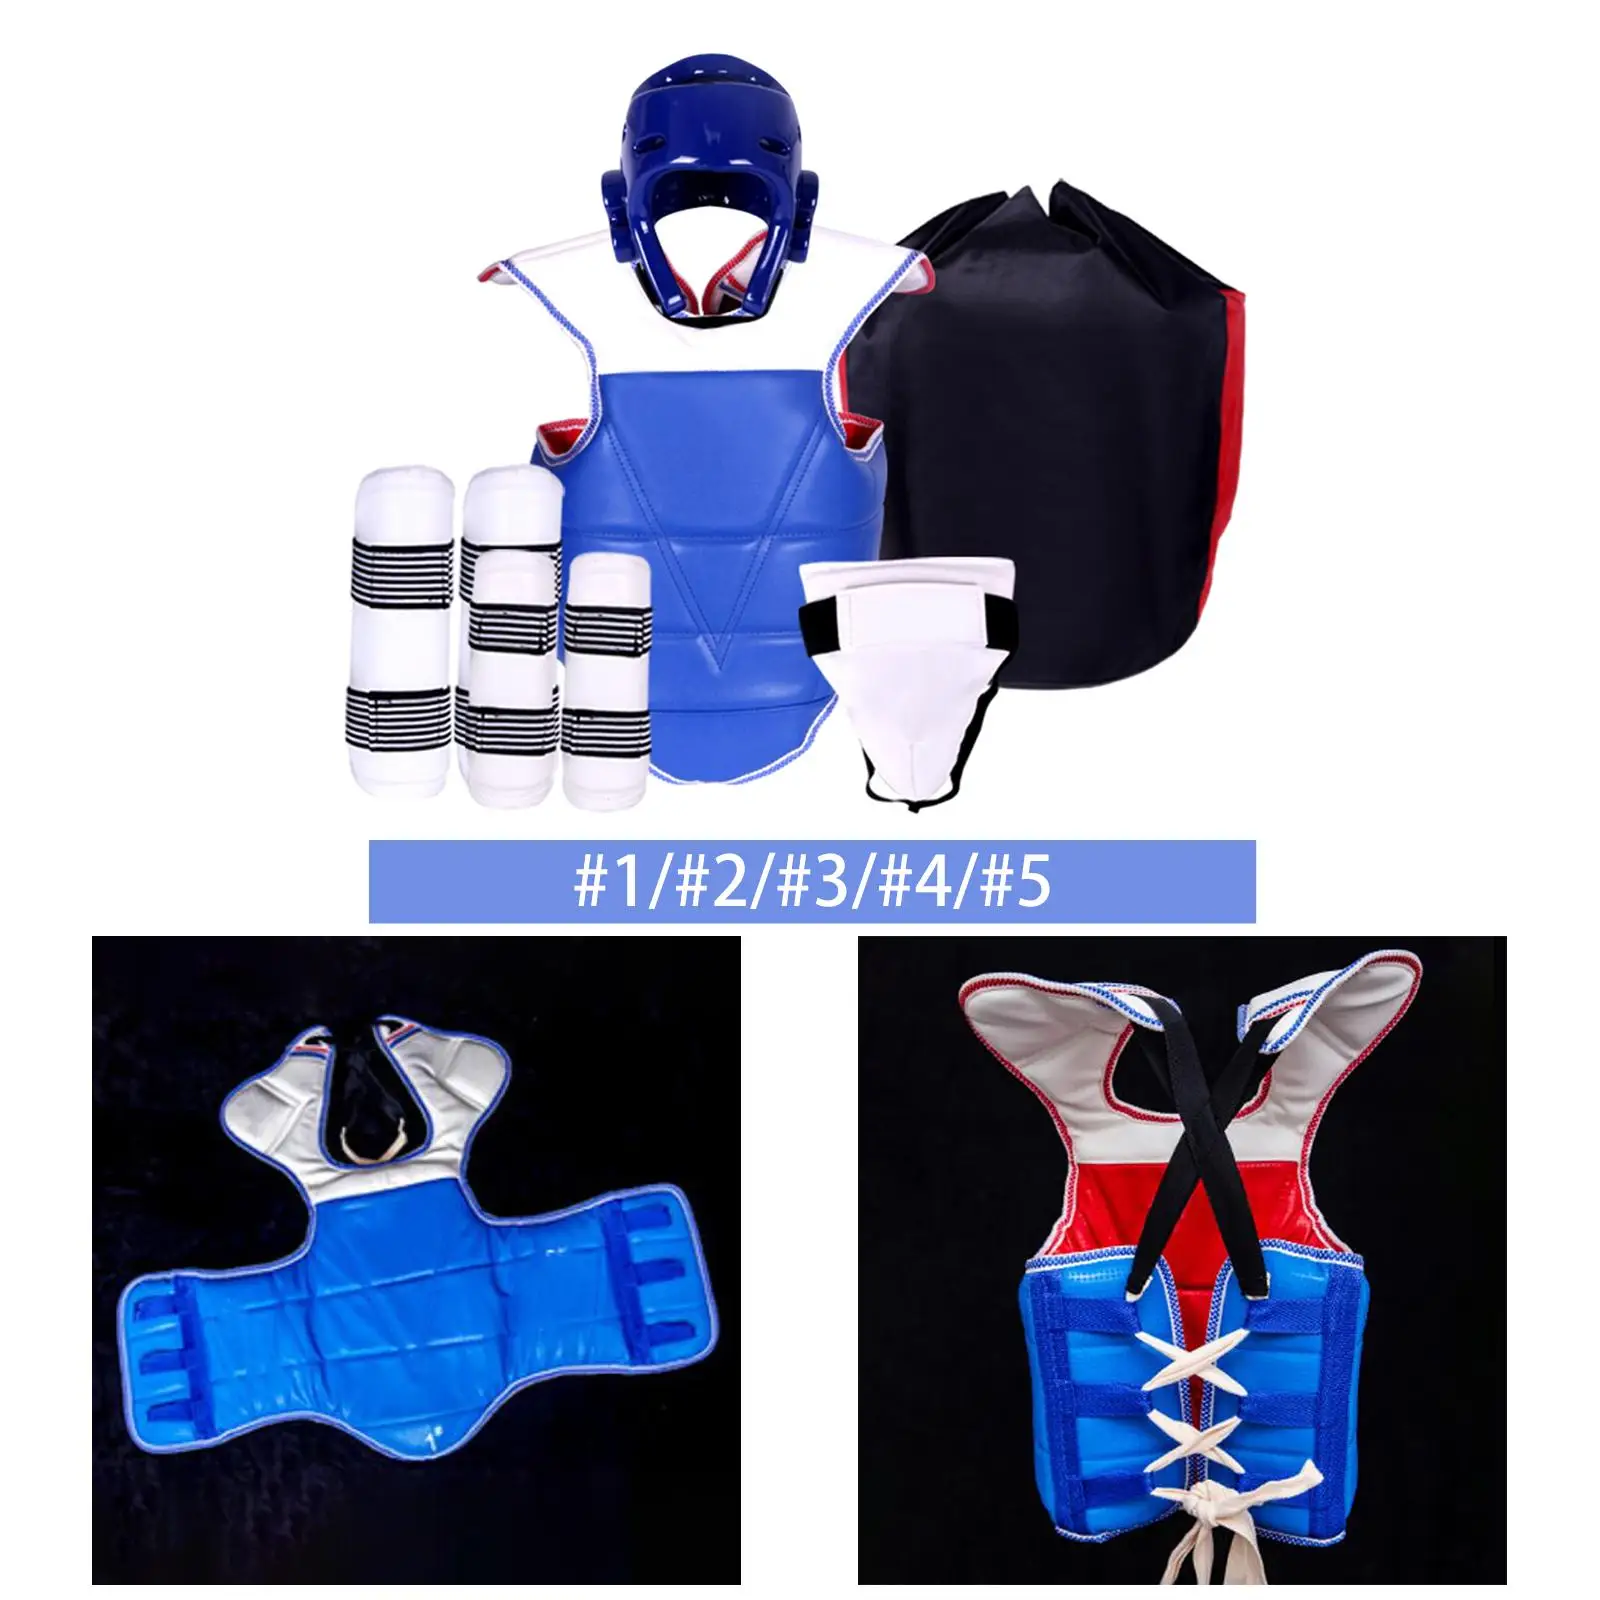 5x Taekwondo Protective Gear, Karate Sparring Gear, Padded Boxing Body Protector